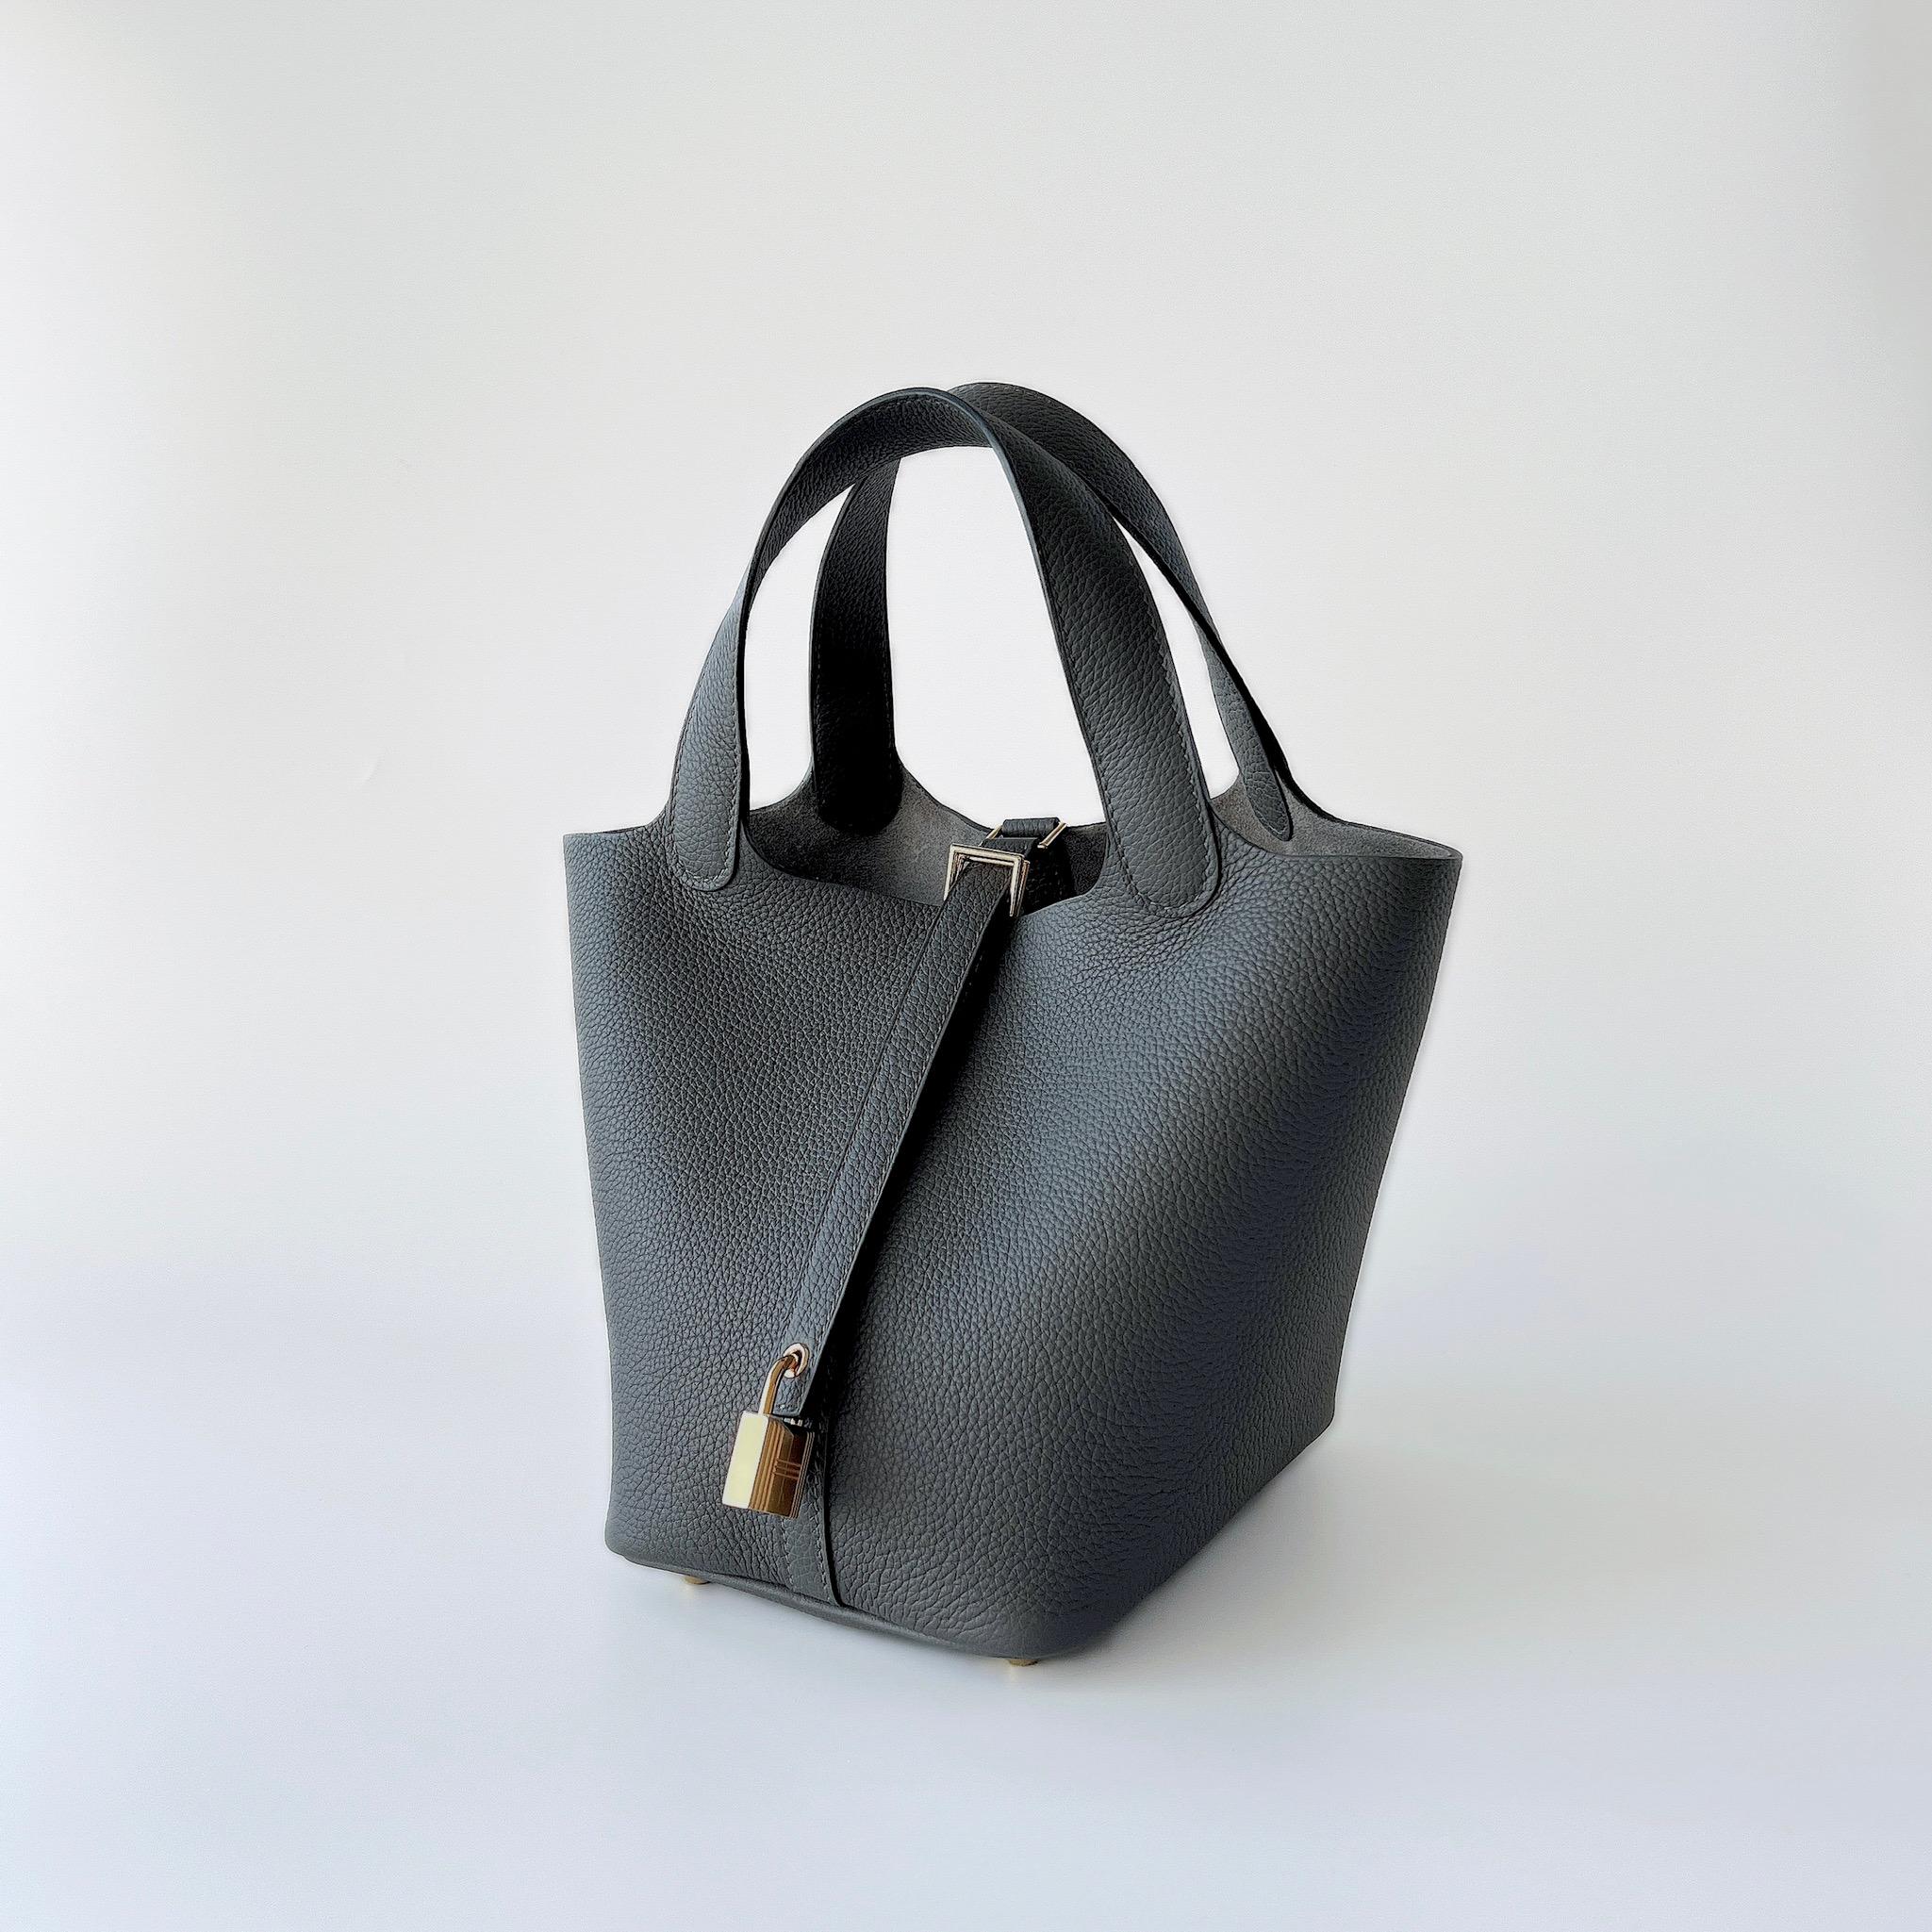 Shop this classic Hermes Picotin 18 which comes in the smaller Picotin size. This Picotin 18 comes in Graphite Grey which is complimented to perfection with Gold Plated Hardware. This bag features 4 gold plated studs which act as feet to prevent